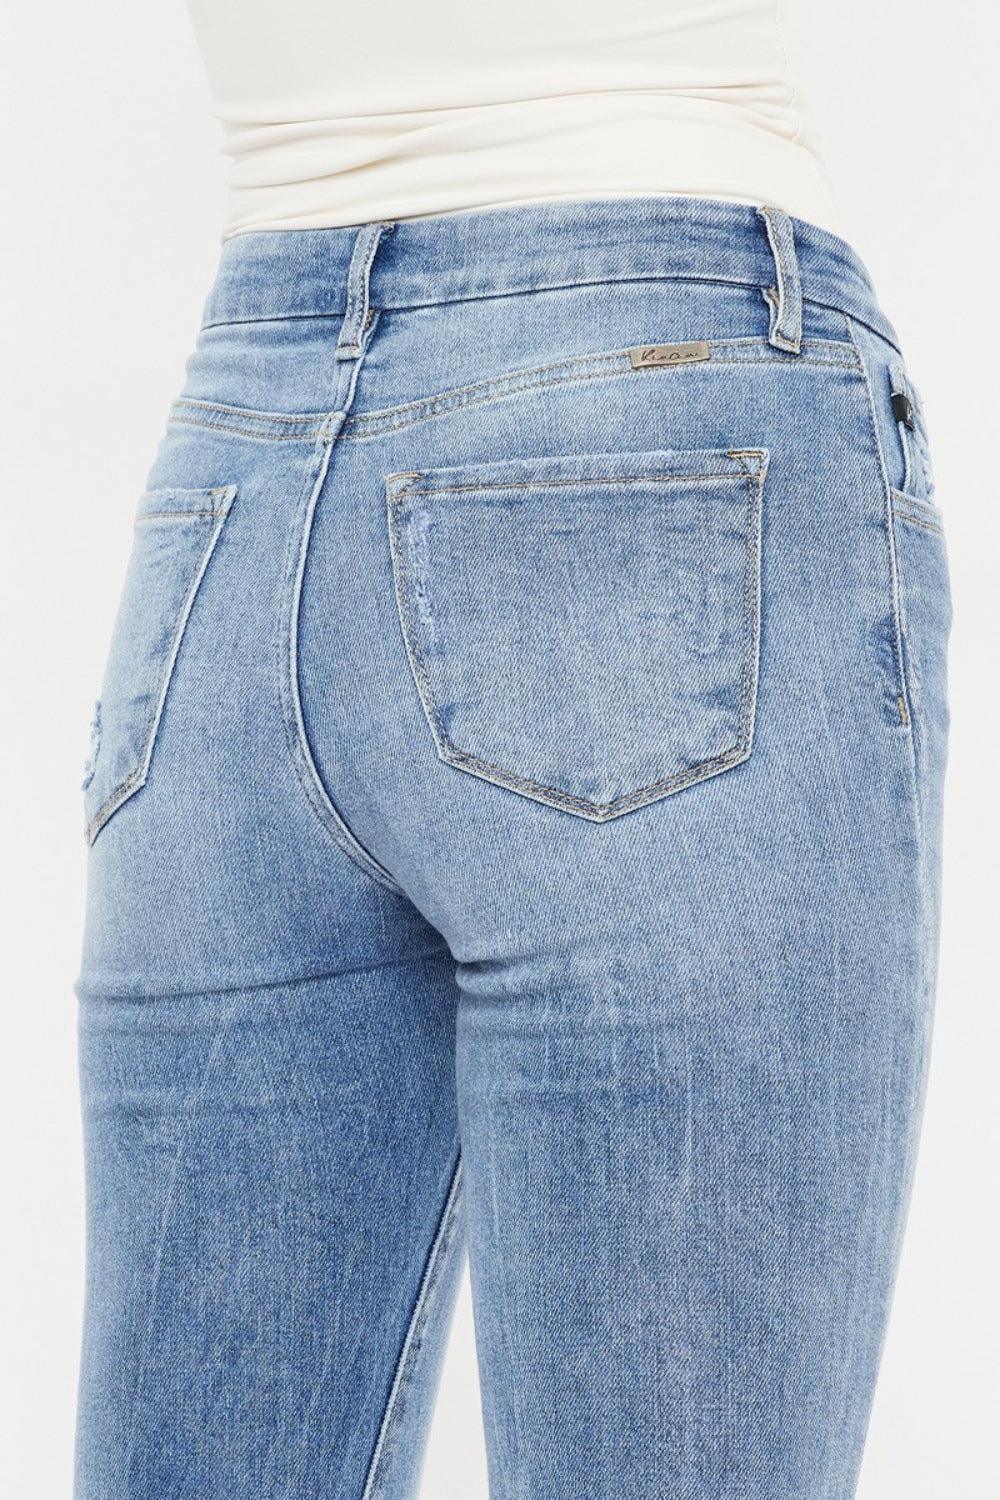 the back of a woman's butt showing her jeans